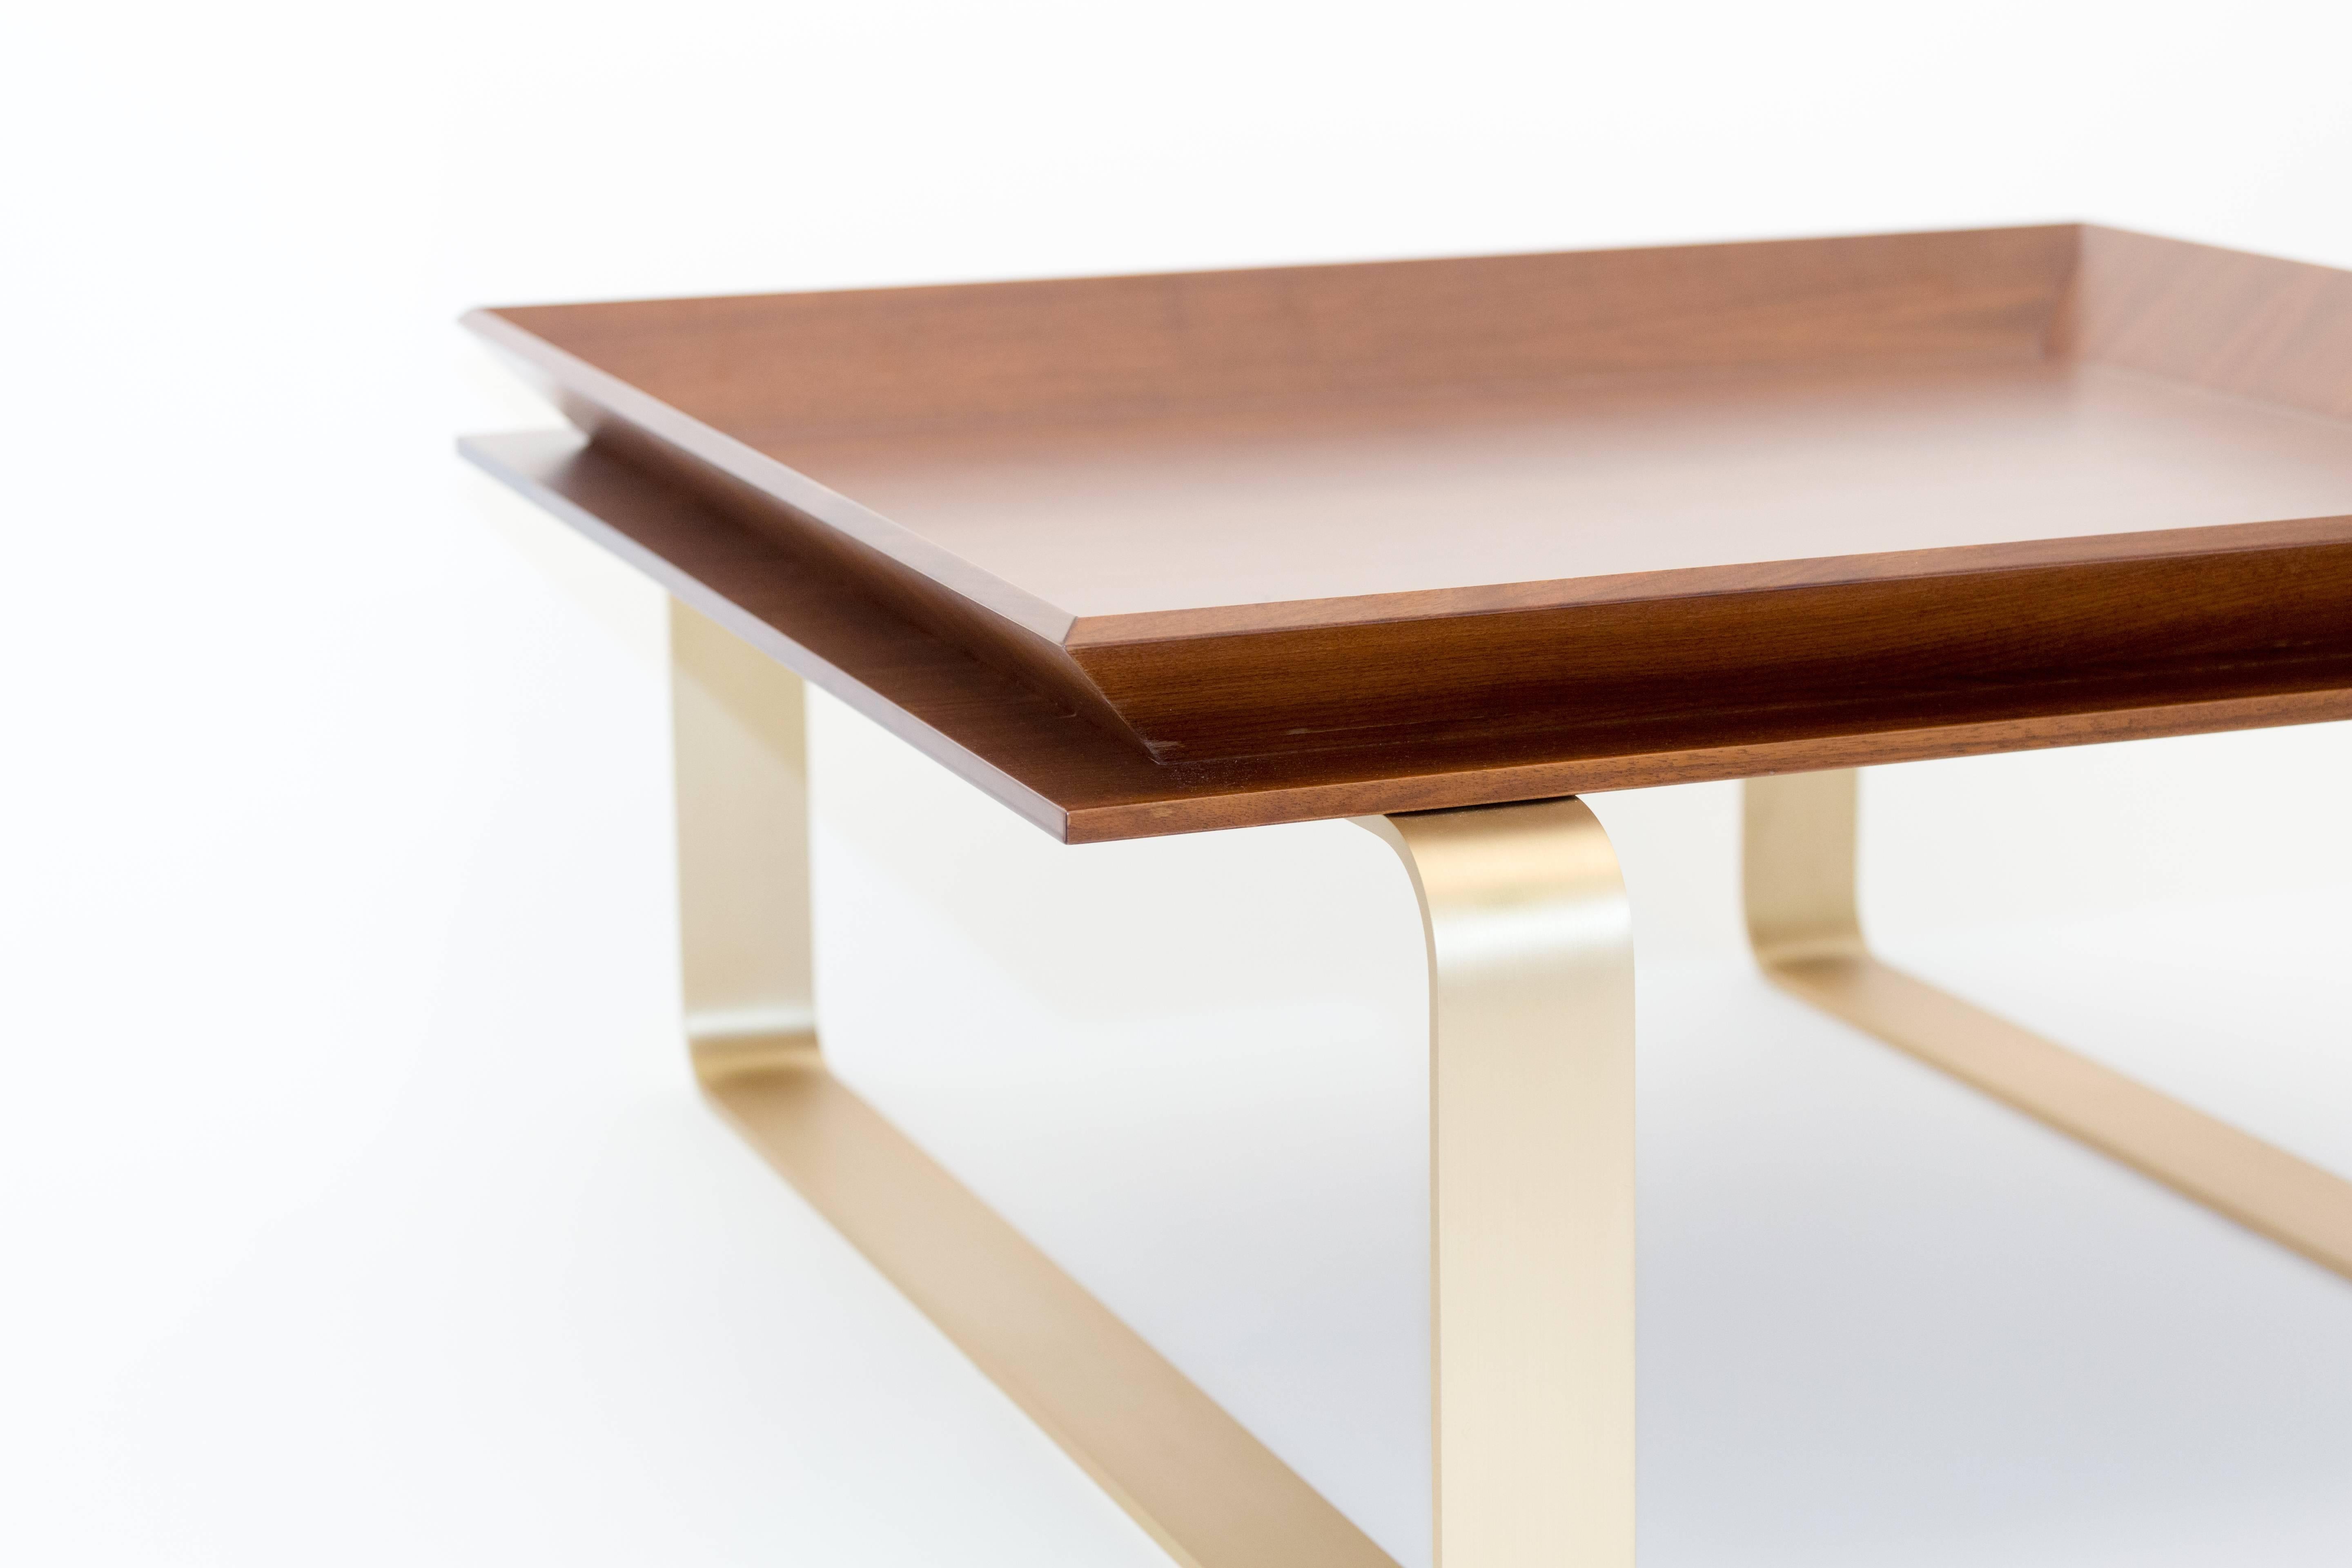 The “Le Tray” square table curved legs is a square coffee table with metal finish legs. It is a part of our Heritage collection. Designed with tradition, comfort and elegance in mind, crafted by hand, it is directly inspired by our Caribbean island